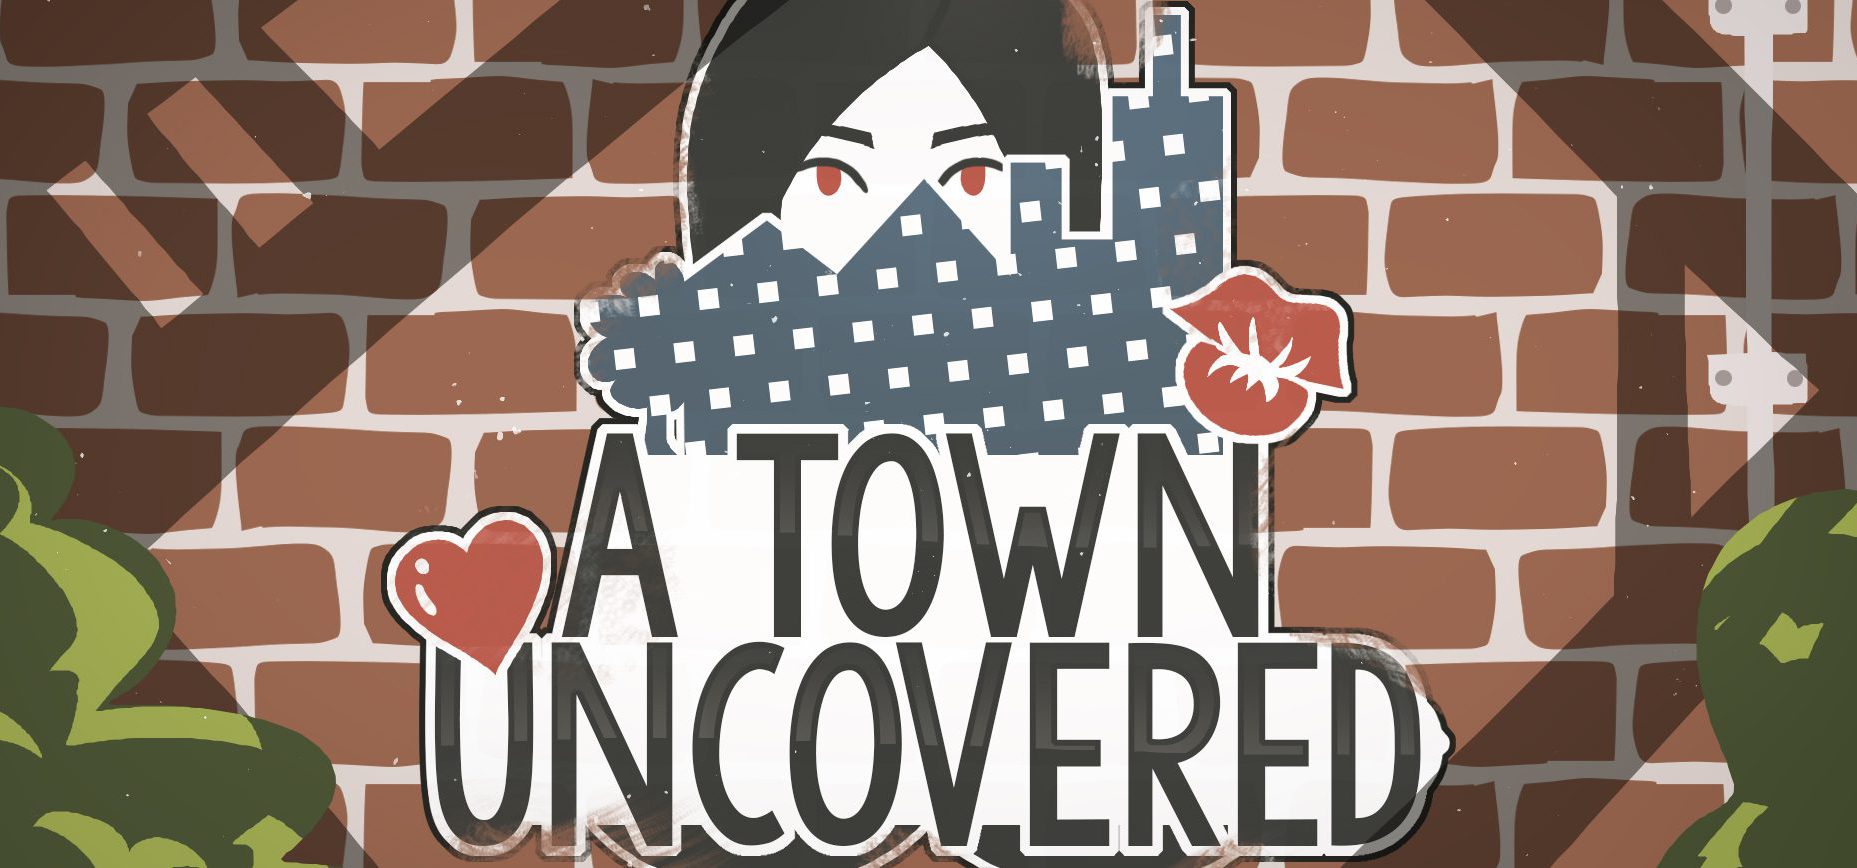 A town uncovered download